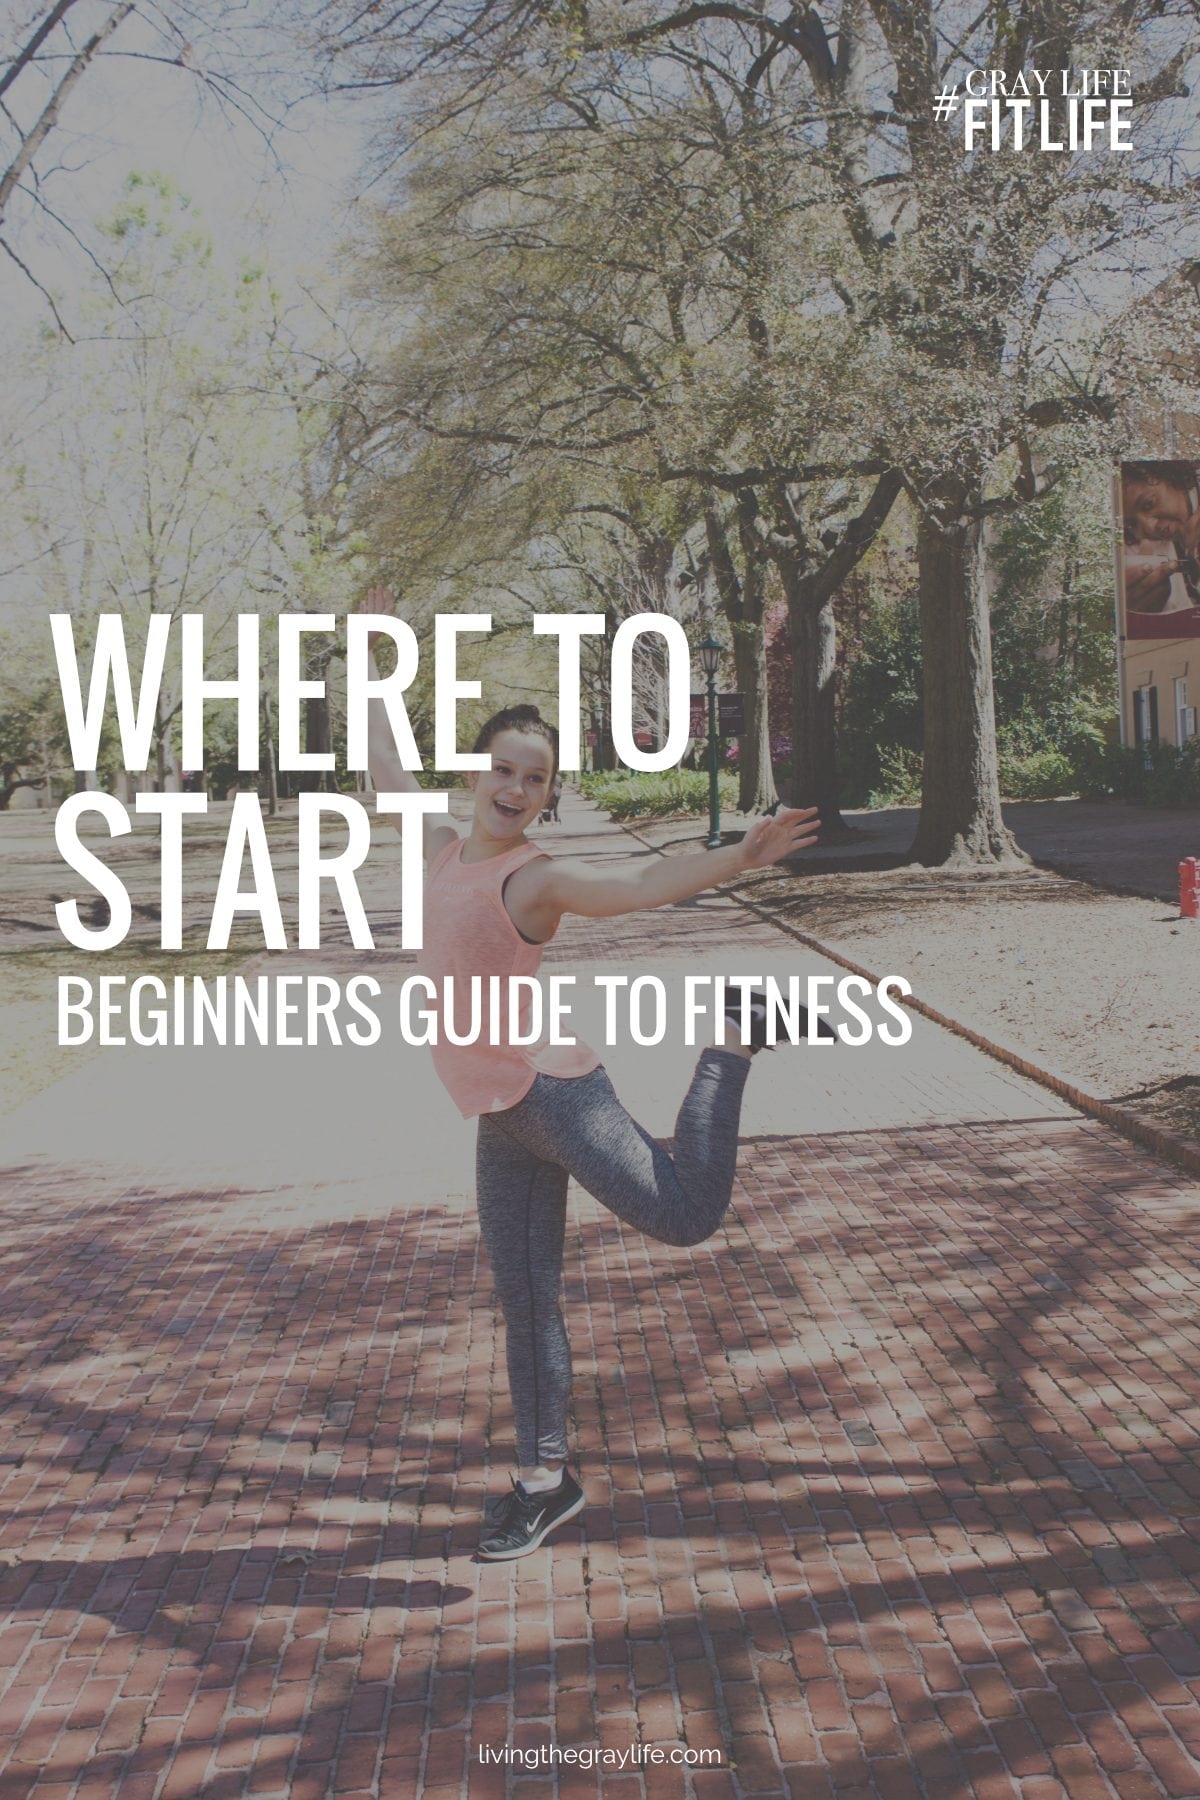 Are you wanting to start on a fitness journey but are unsure of where to start? Try trendy workouts and fad diets, but nothing just seems to stick? Here's my guide to starting at the gym and you'll be on your way to accomplishing your fitness goals in no time!